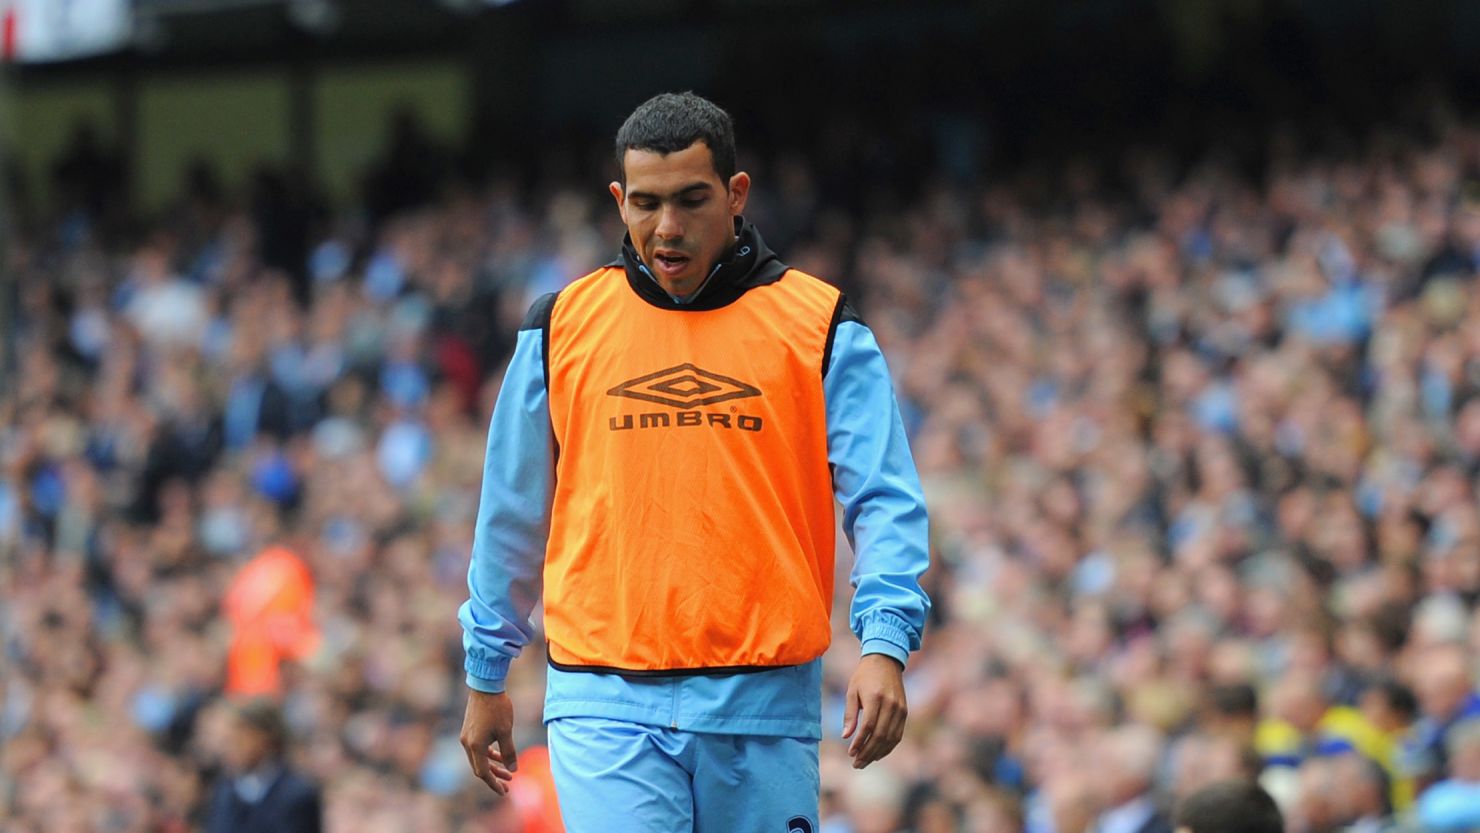 Carlos Tevez captained Manchester City to FA Cup success last season but has rarely played since then.